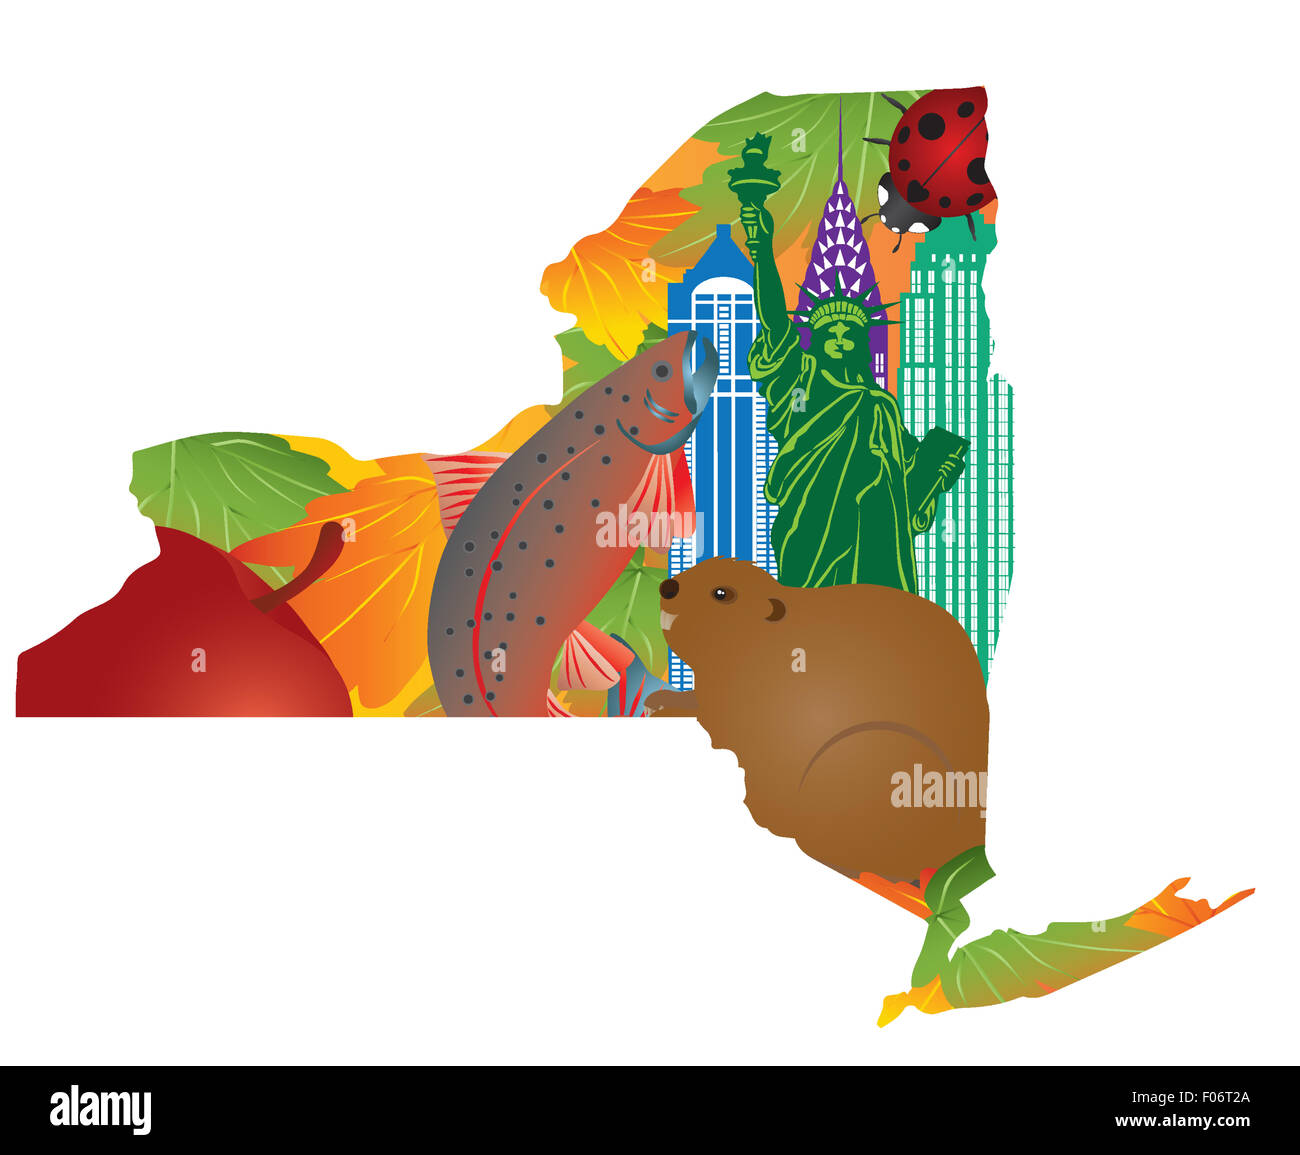 State of New York Official Symbols with Statue of Liberty Beaver Brook Trout Ladybug Big Apple Sugar Maple Leaves in Map Outline Stock Photo